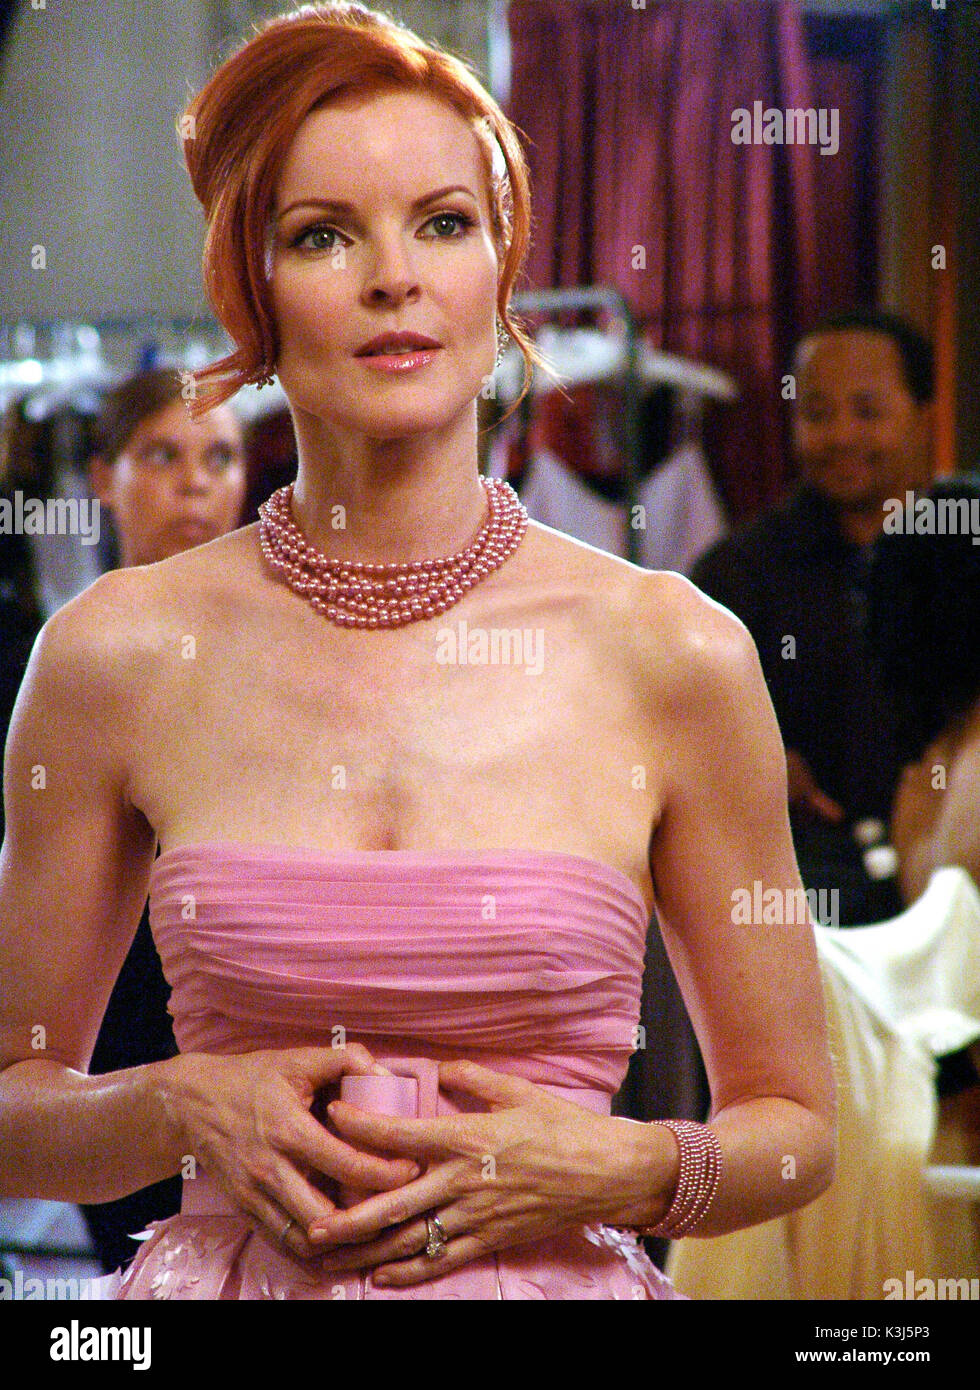 DESPERATE HOUSEWIVES - Suspicious Minds MARCIA CROSS DESPERATE HOUSEWIVES  Series#1/Episode#9/&quot;Suspicious Minds&quot; MARCIA CROSS as Bree Van De  Kamp Date: 2004 Stock Photo - Alamy